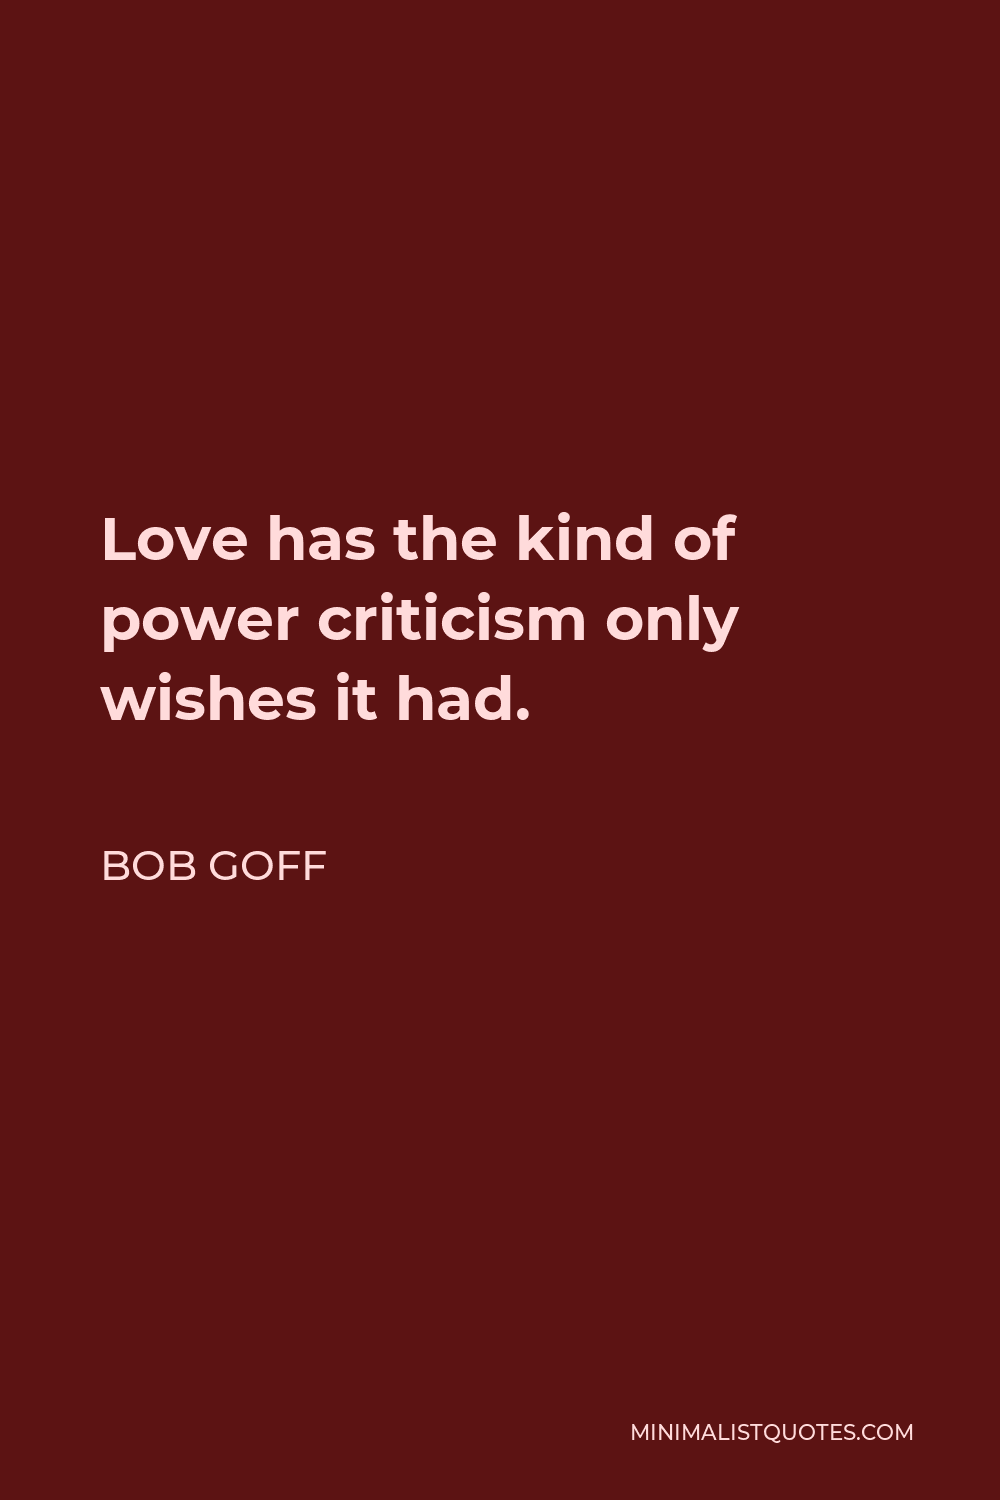 Bob Goff Quote - Love has the kind of power criticism only wishes it had.